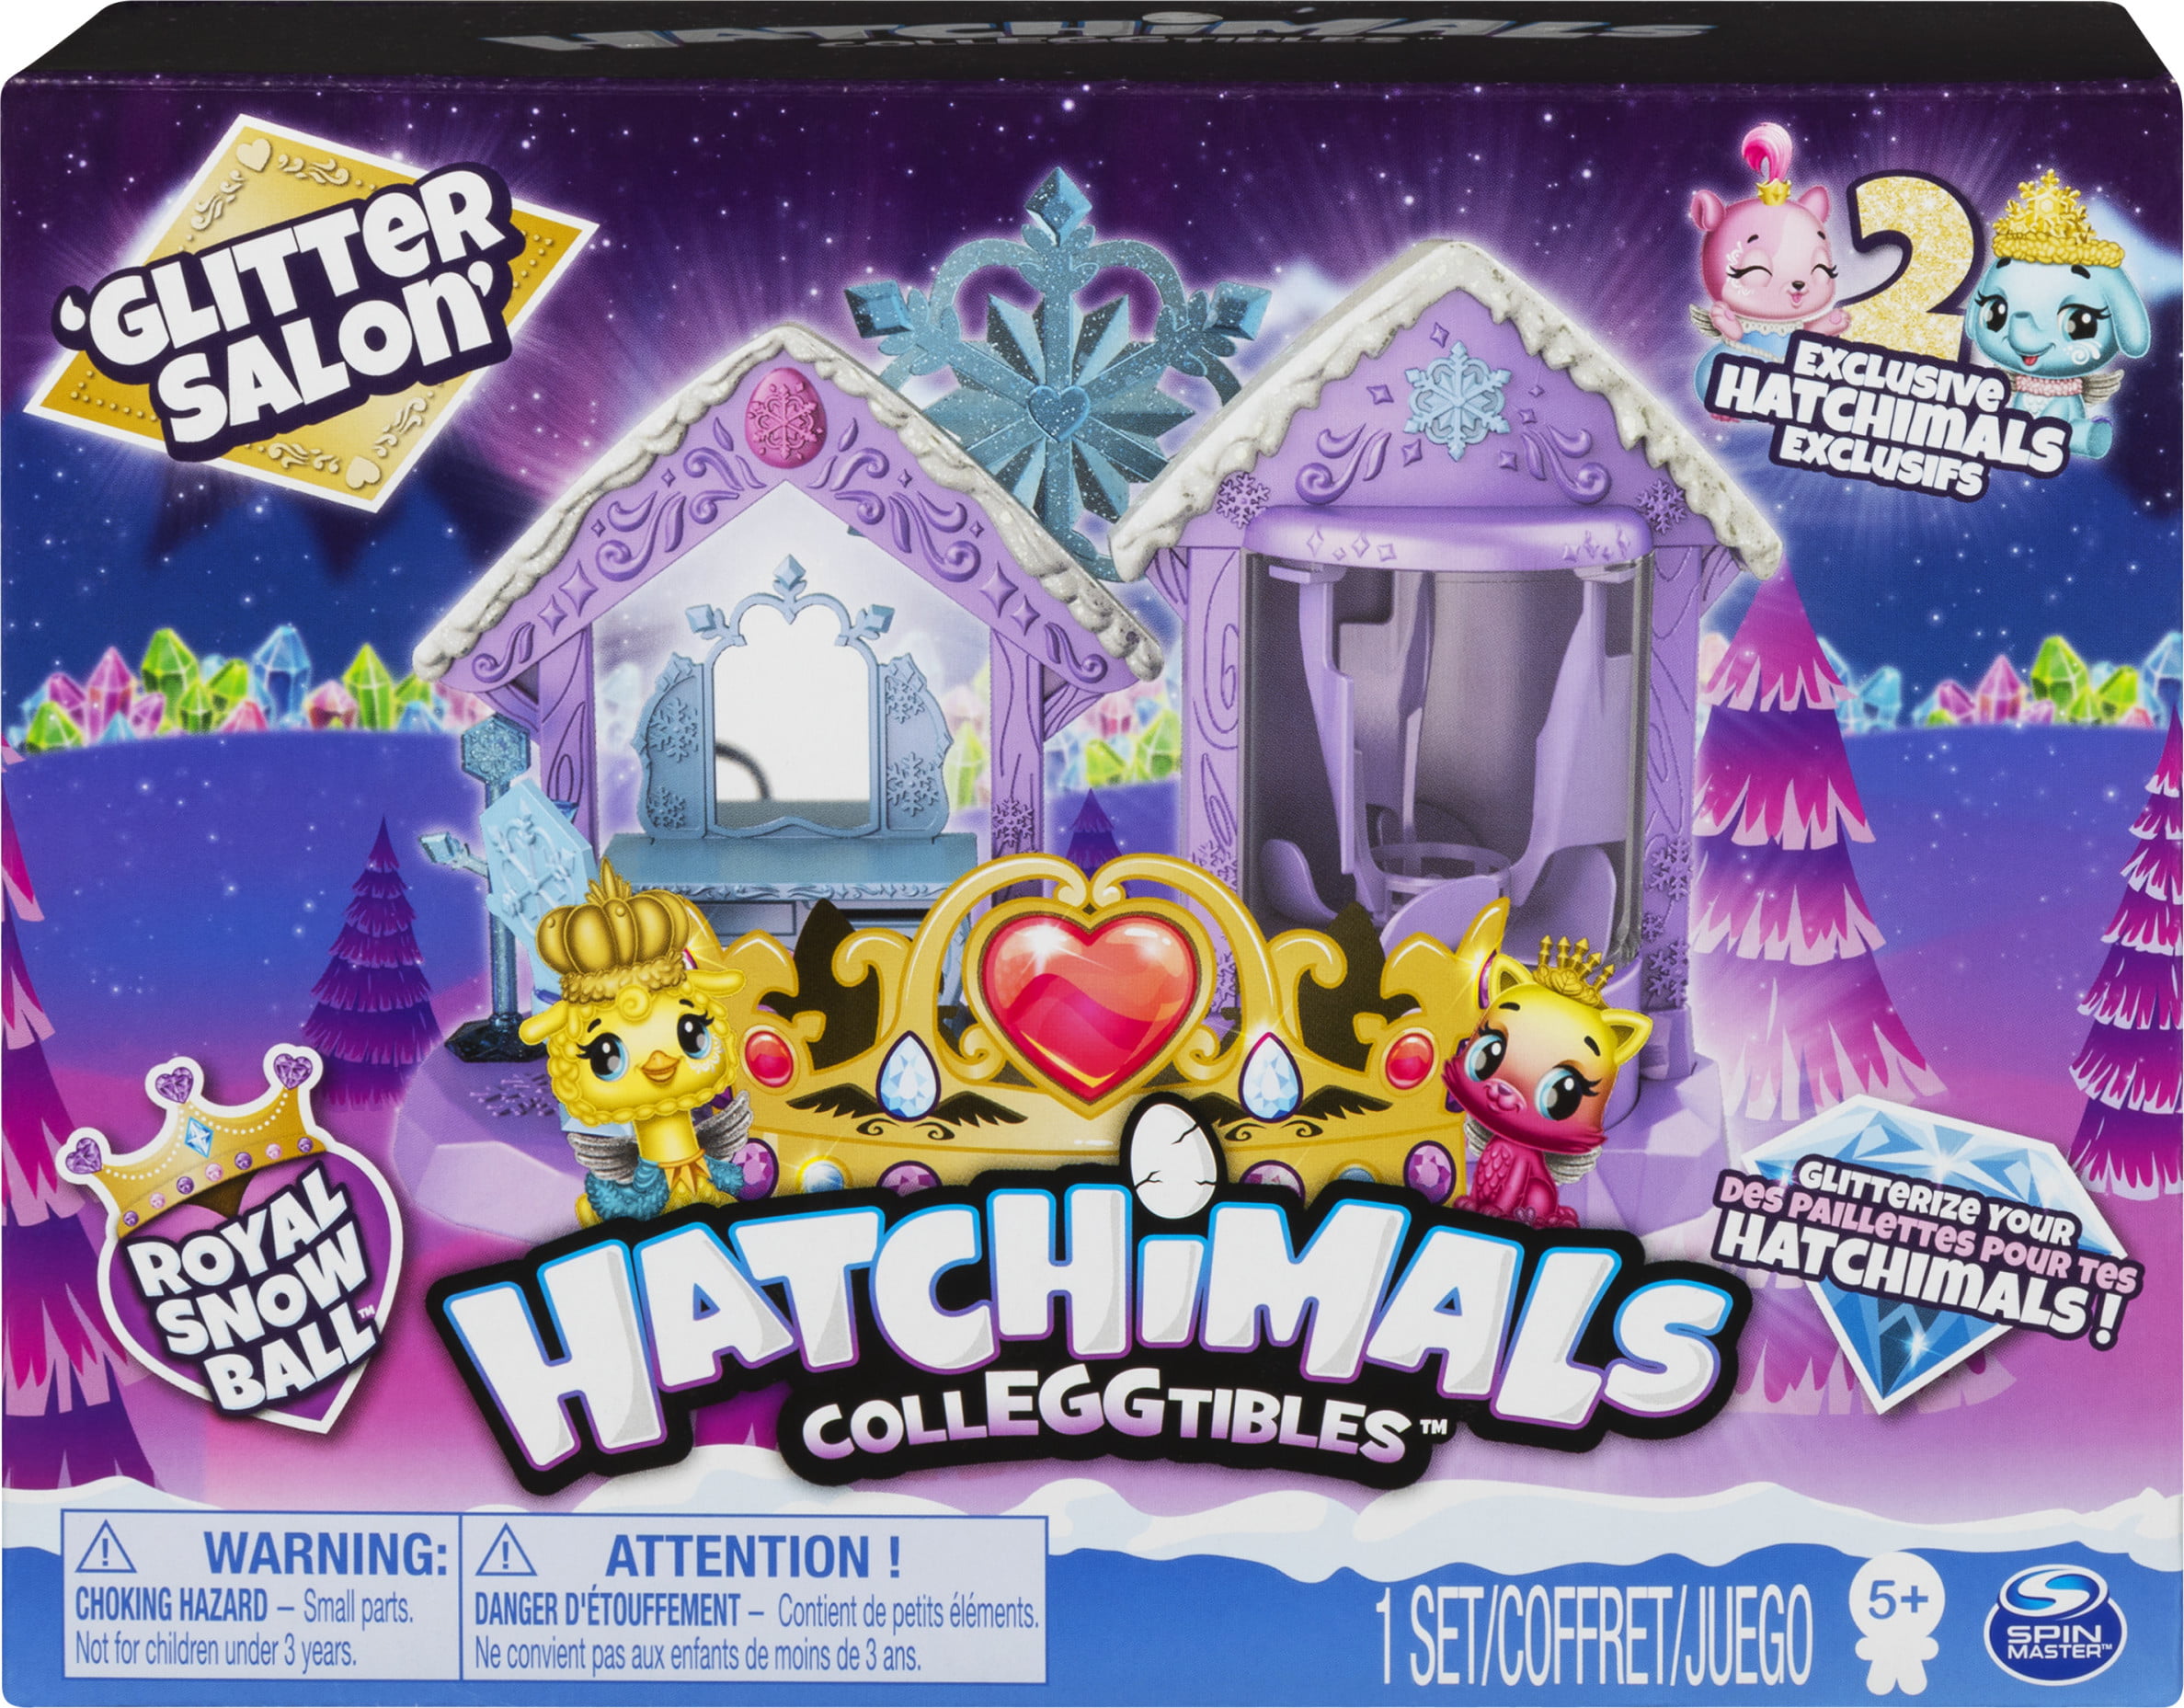 Depression gnist Kom op Hatchimals CollEGGtibles, Glitter Salon Playset with 2 Exclusive Hatchimals,  Girl Toys, Girls Gifts for Ages 5 and up - Walmart.com